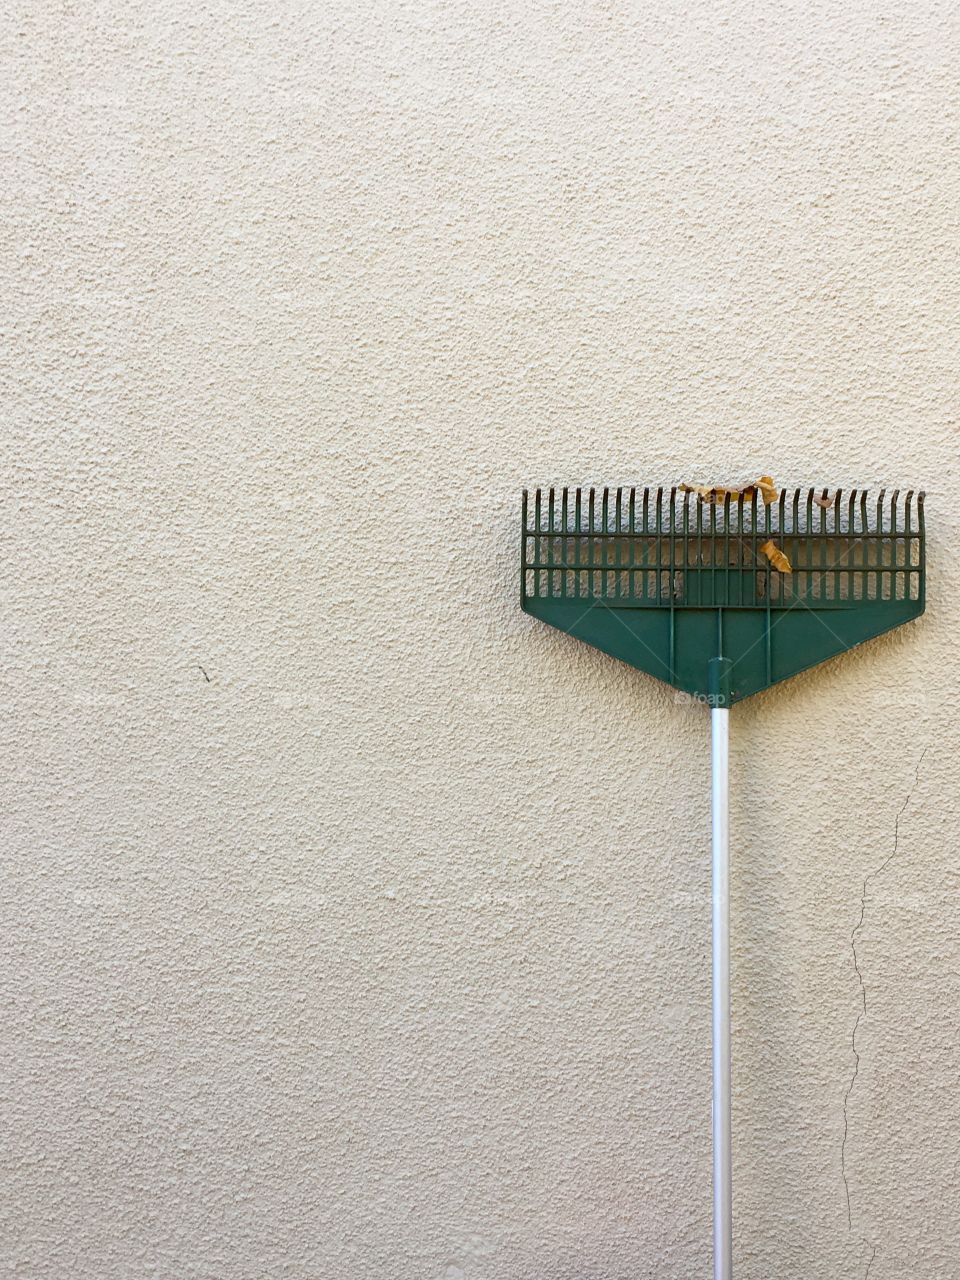 Green garden rake leaning up against stucco exterior wall, minimalist negative space